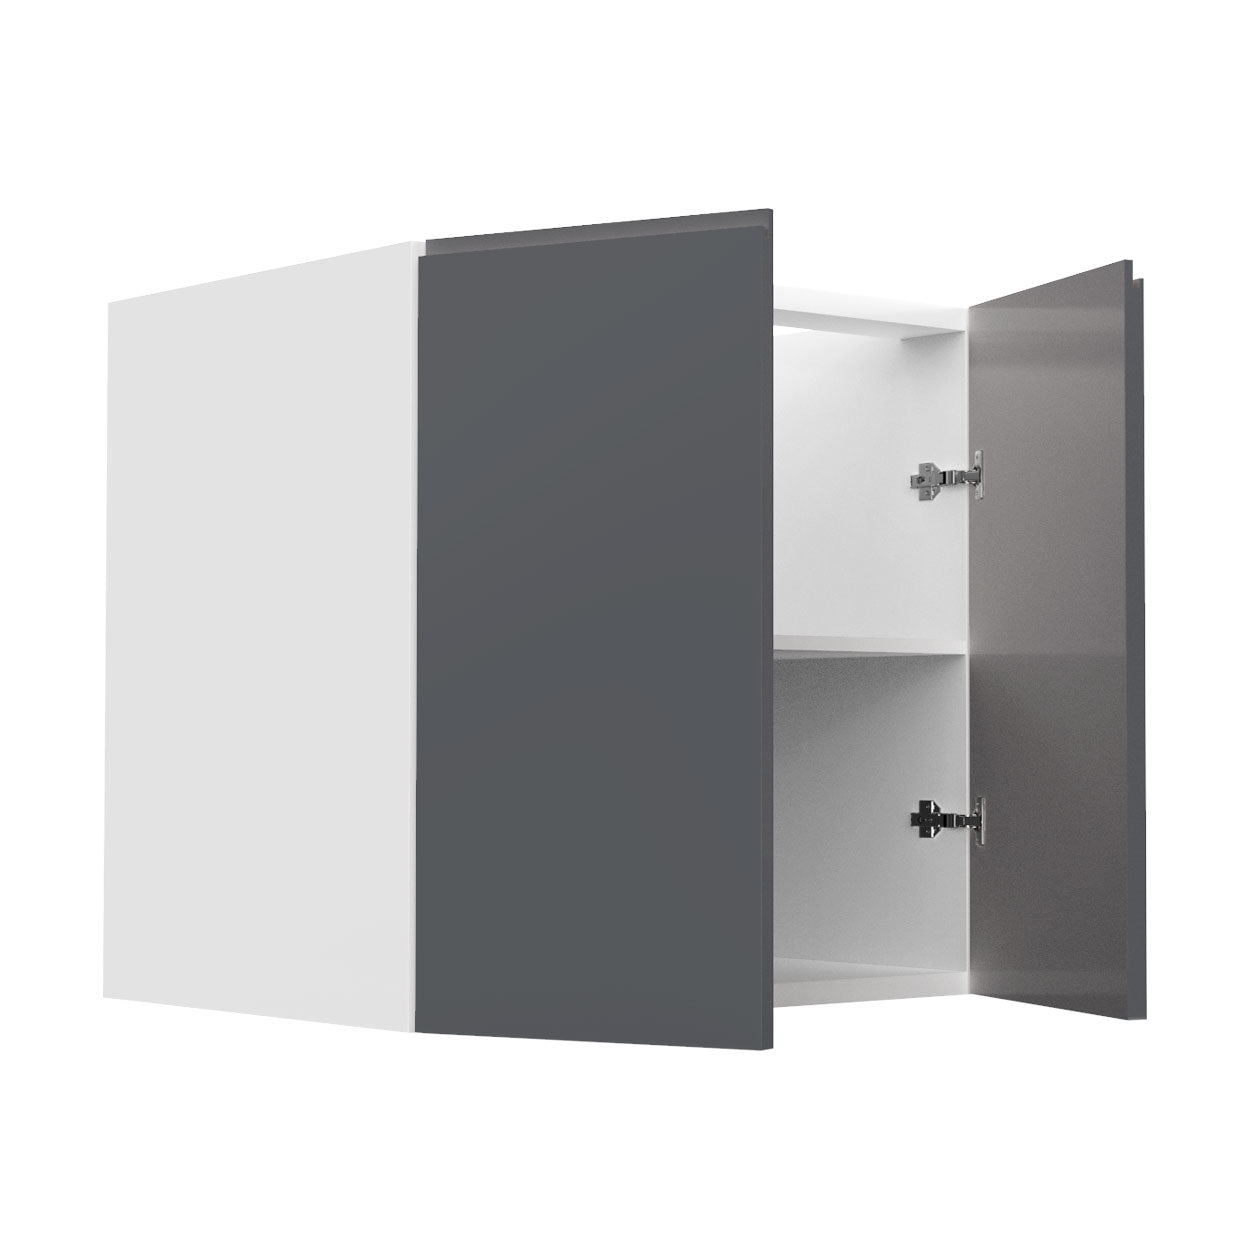 RTA - Lacquer Grey - Full Height Double Door Base Cabinets | 30"W x 30"H x 23.8"D